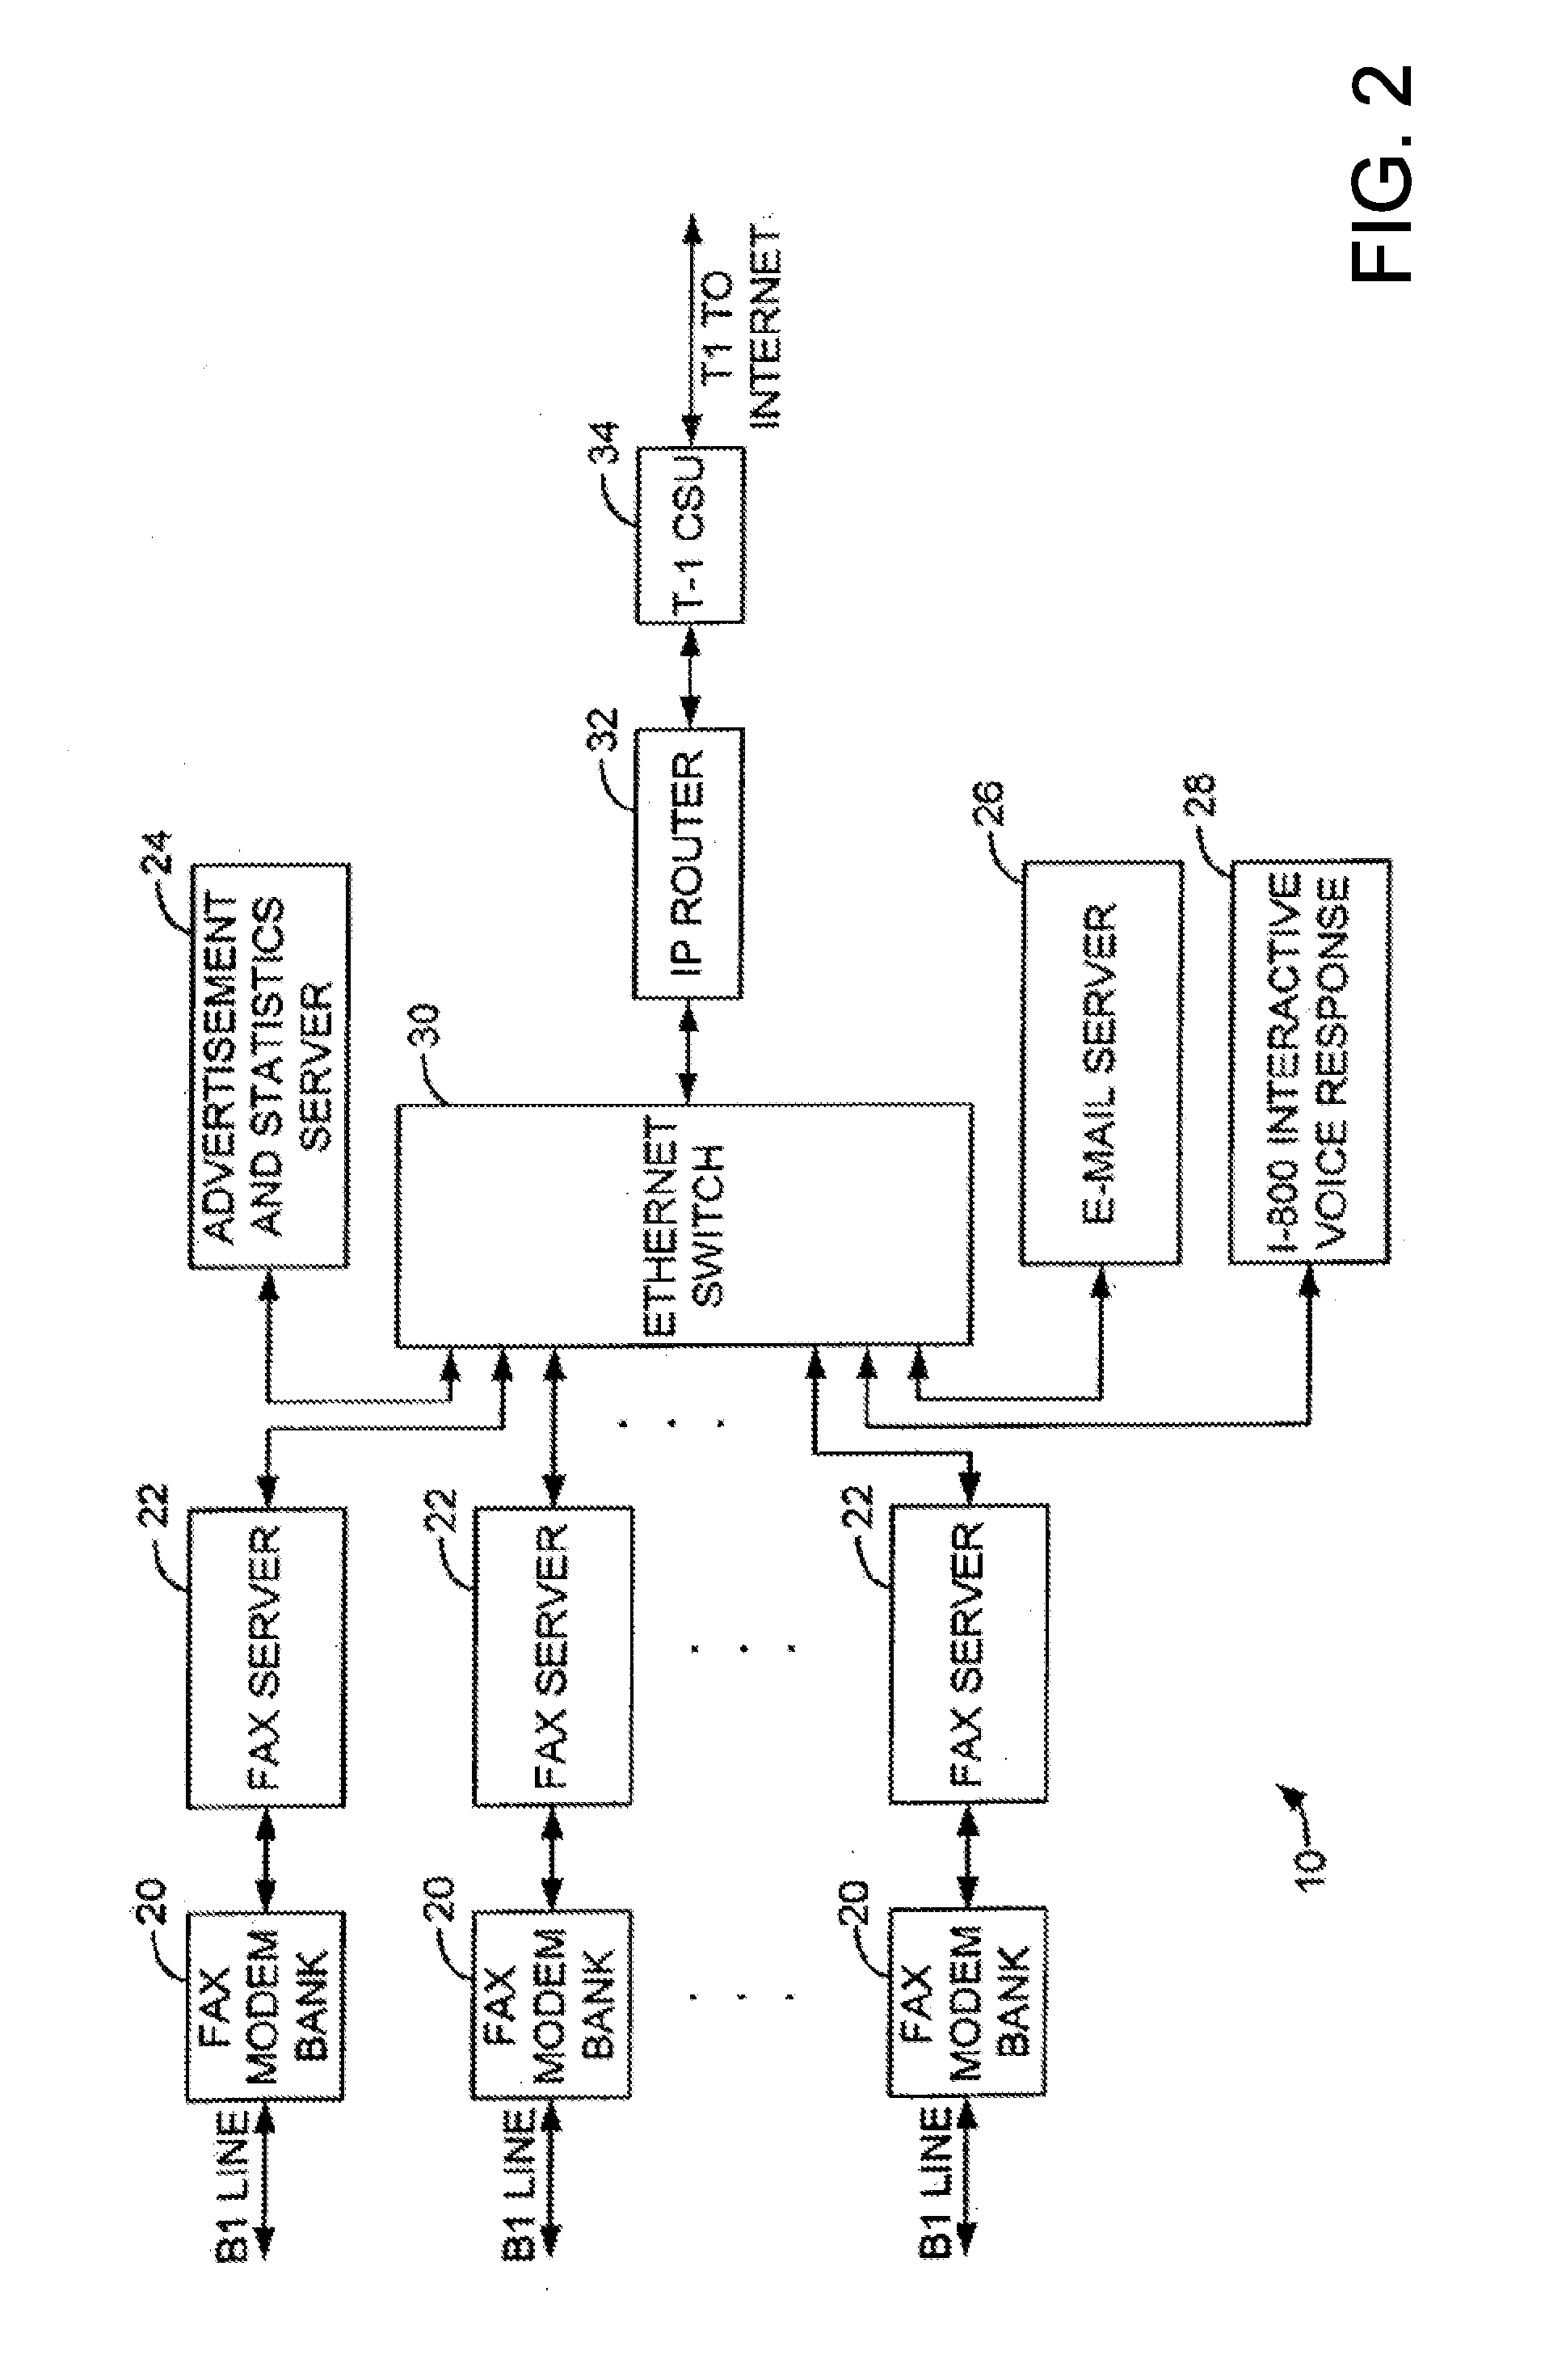 Methods and apparatus for facsimile transmissions to electronic storage destinations including embedded barcode fonts